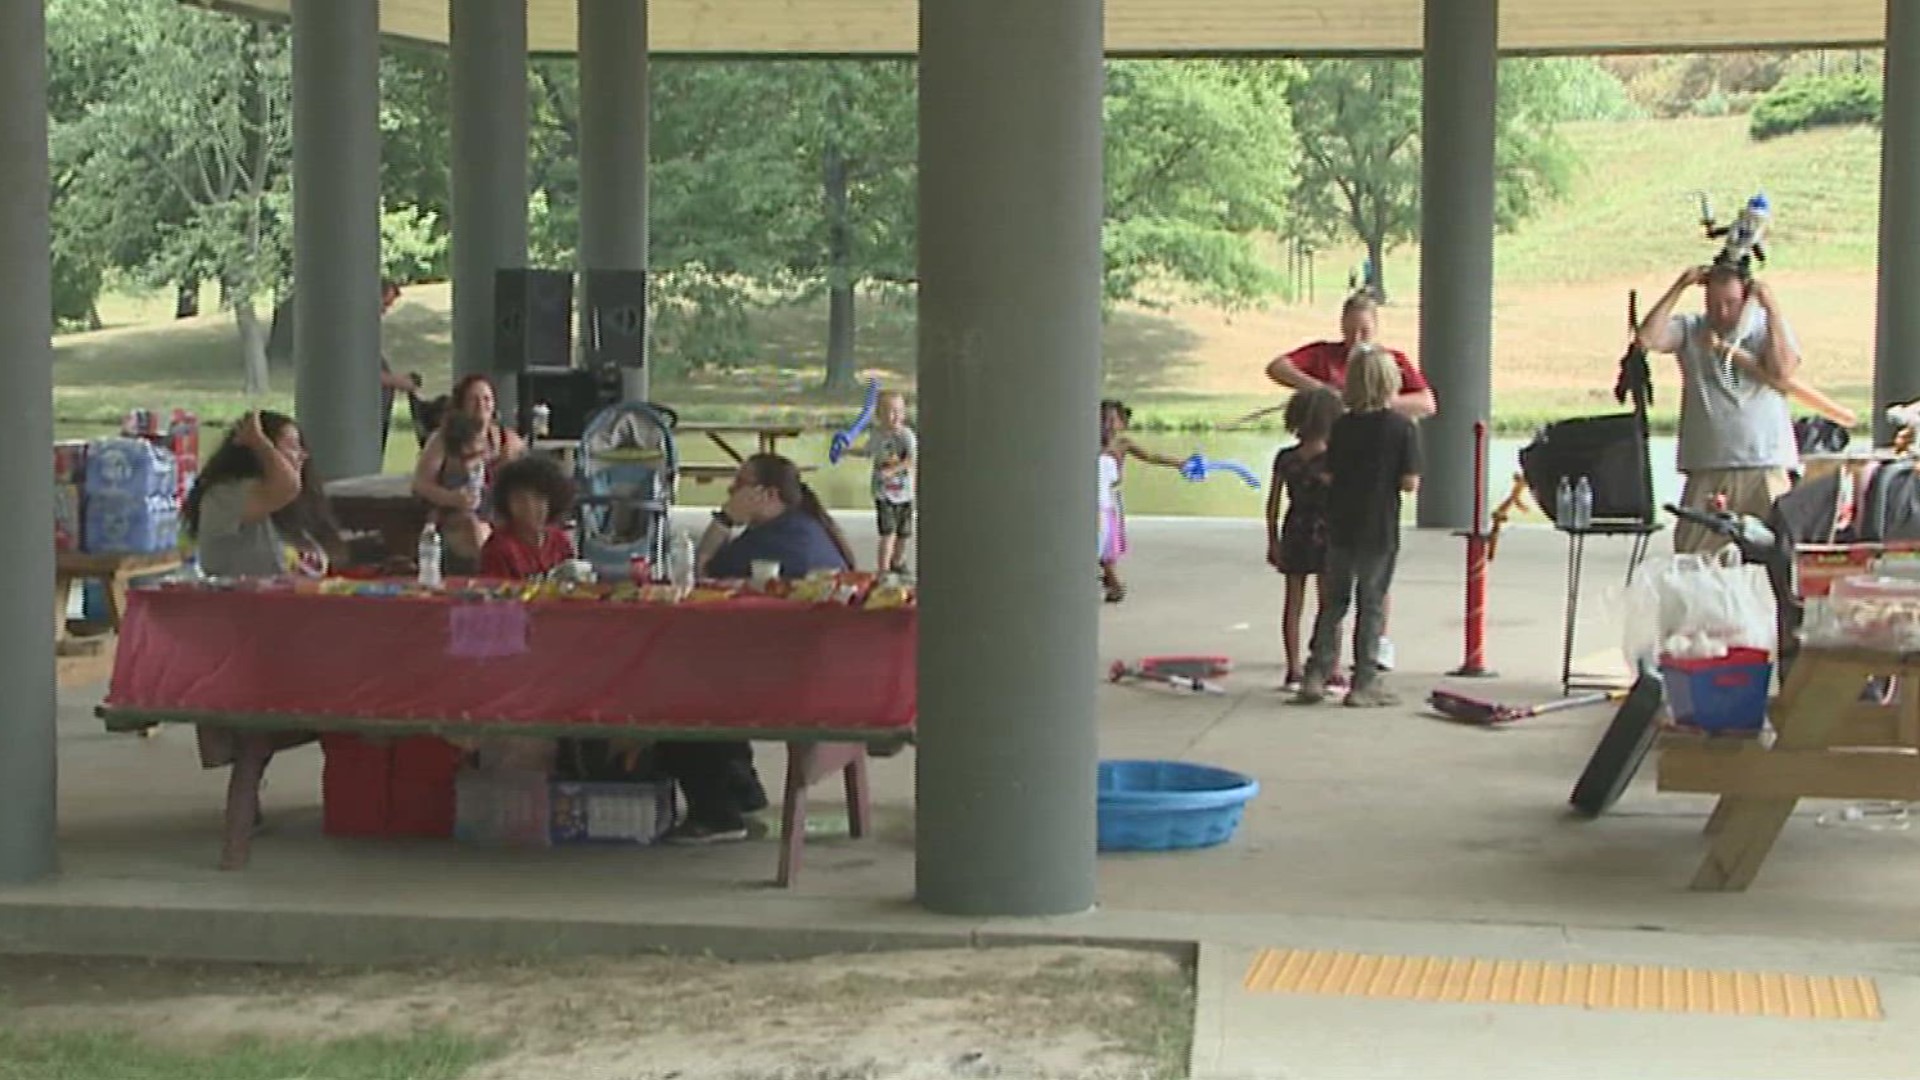 A picnic was held Sunday at Kirby Park in Wilkes-Barre to help raise awareness for congenital heart defects.